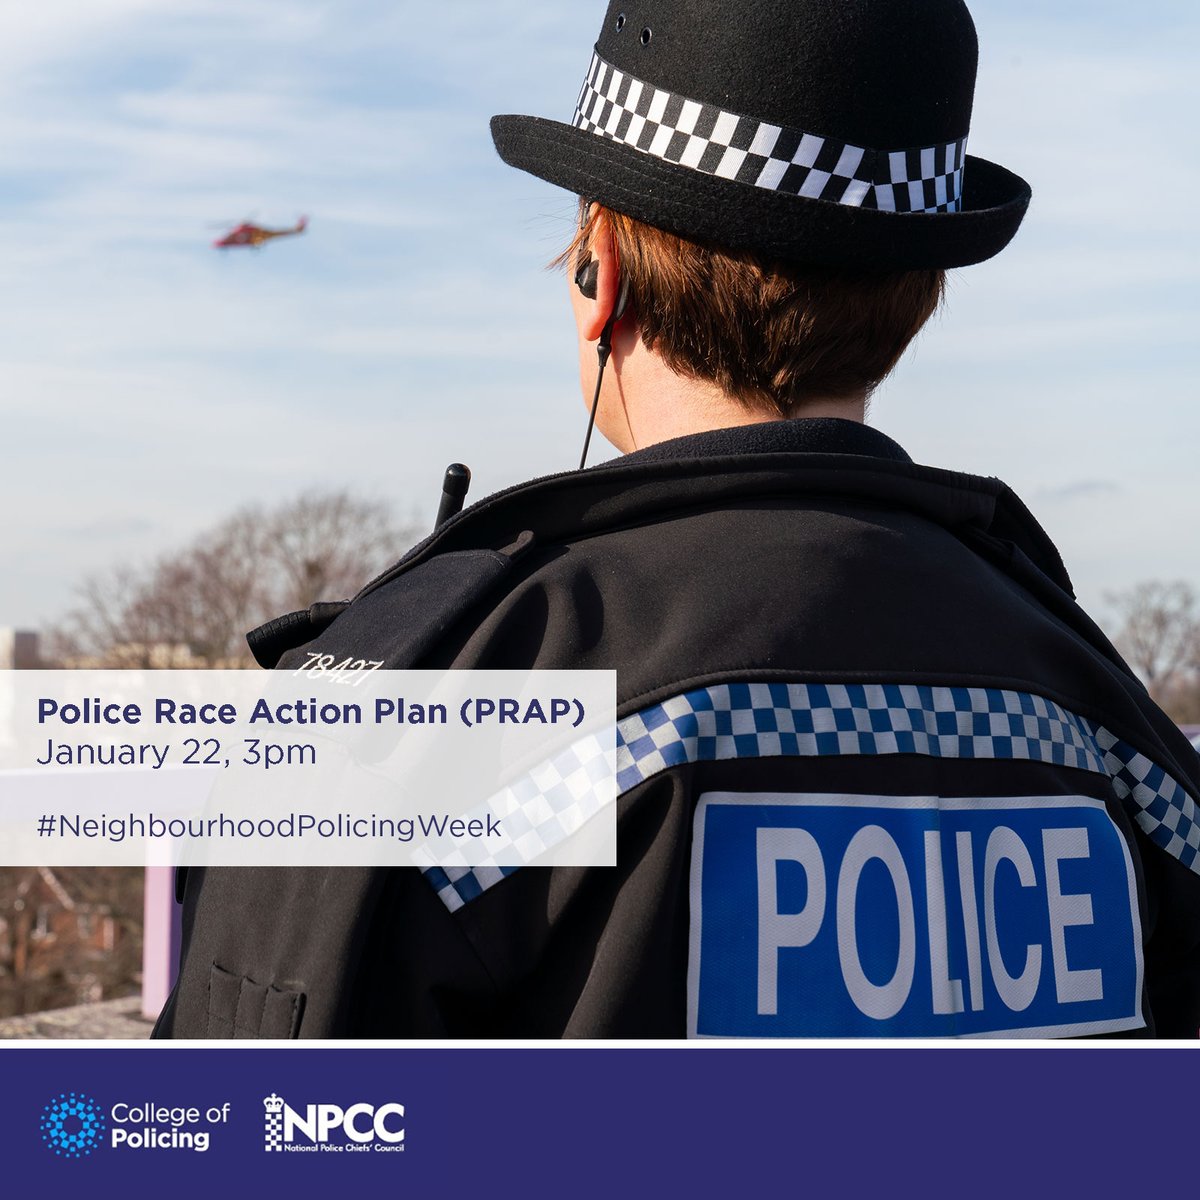 Connect with Detective Superintendent Ron Lock to learn more about the Police Race Action Plan (PRAP) on 22 January at 3pm. Grab your spot for this crucial event ⬇ events.teams.microsoft.com/event/ae95aac6…